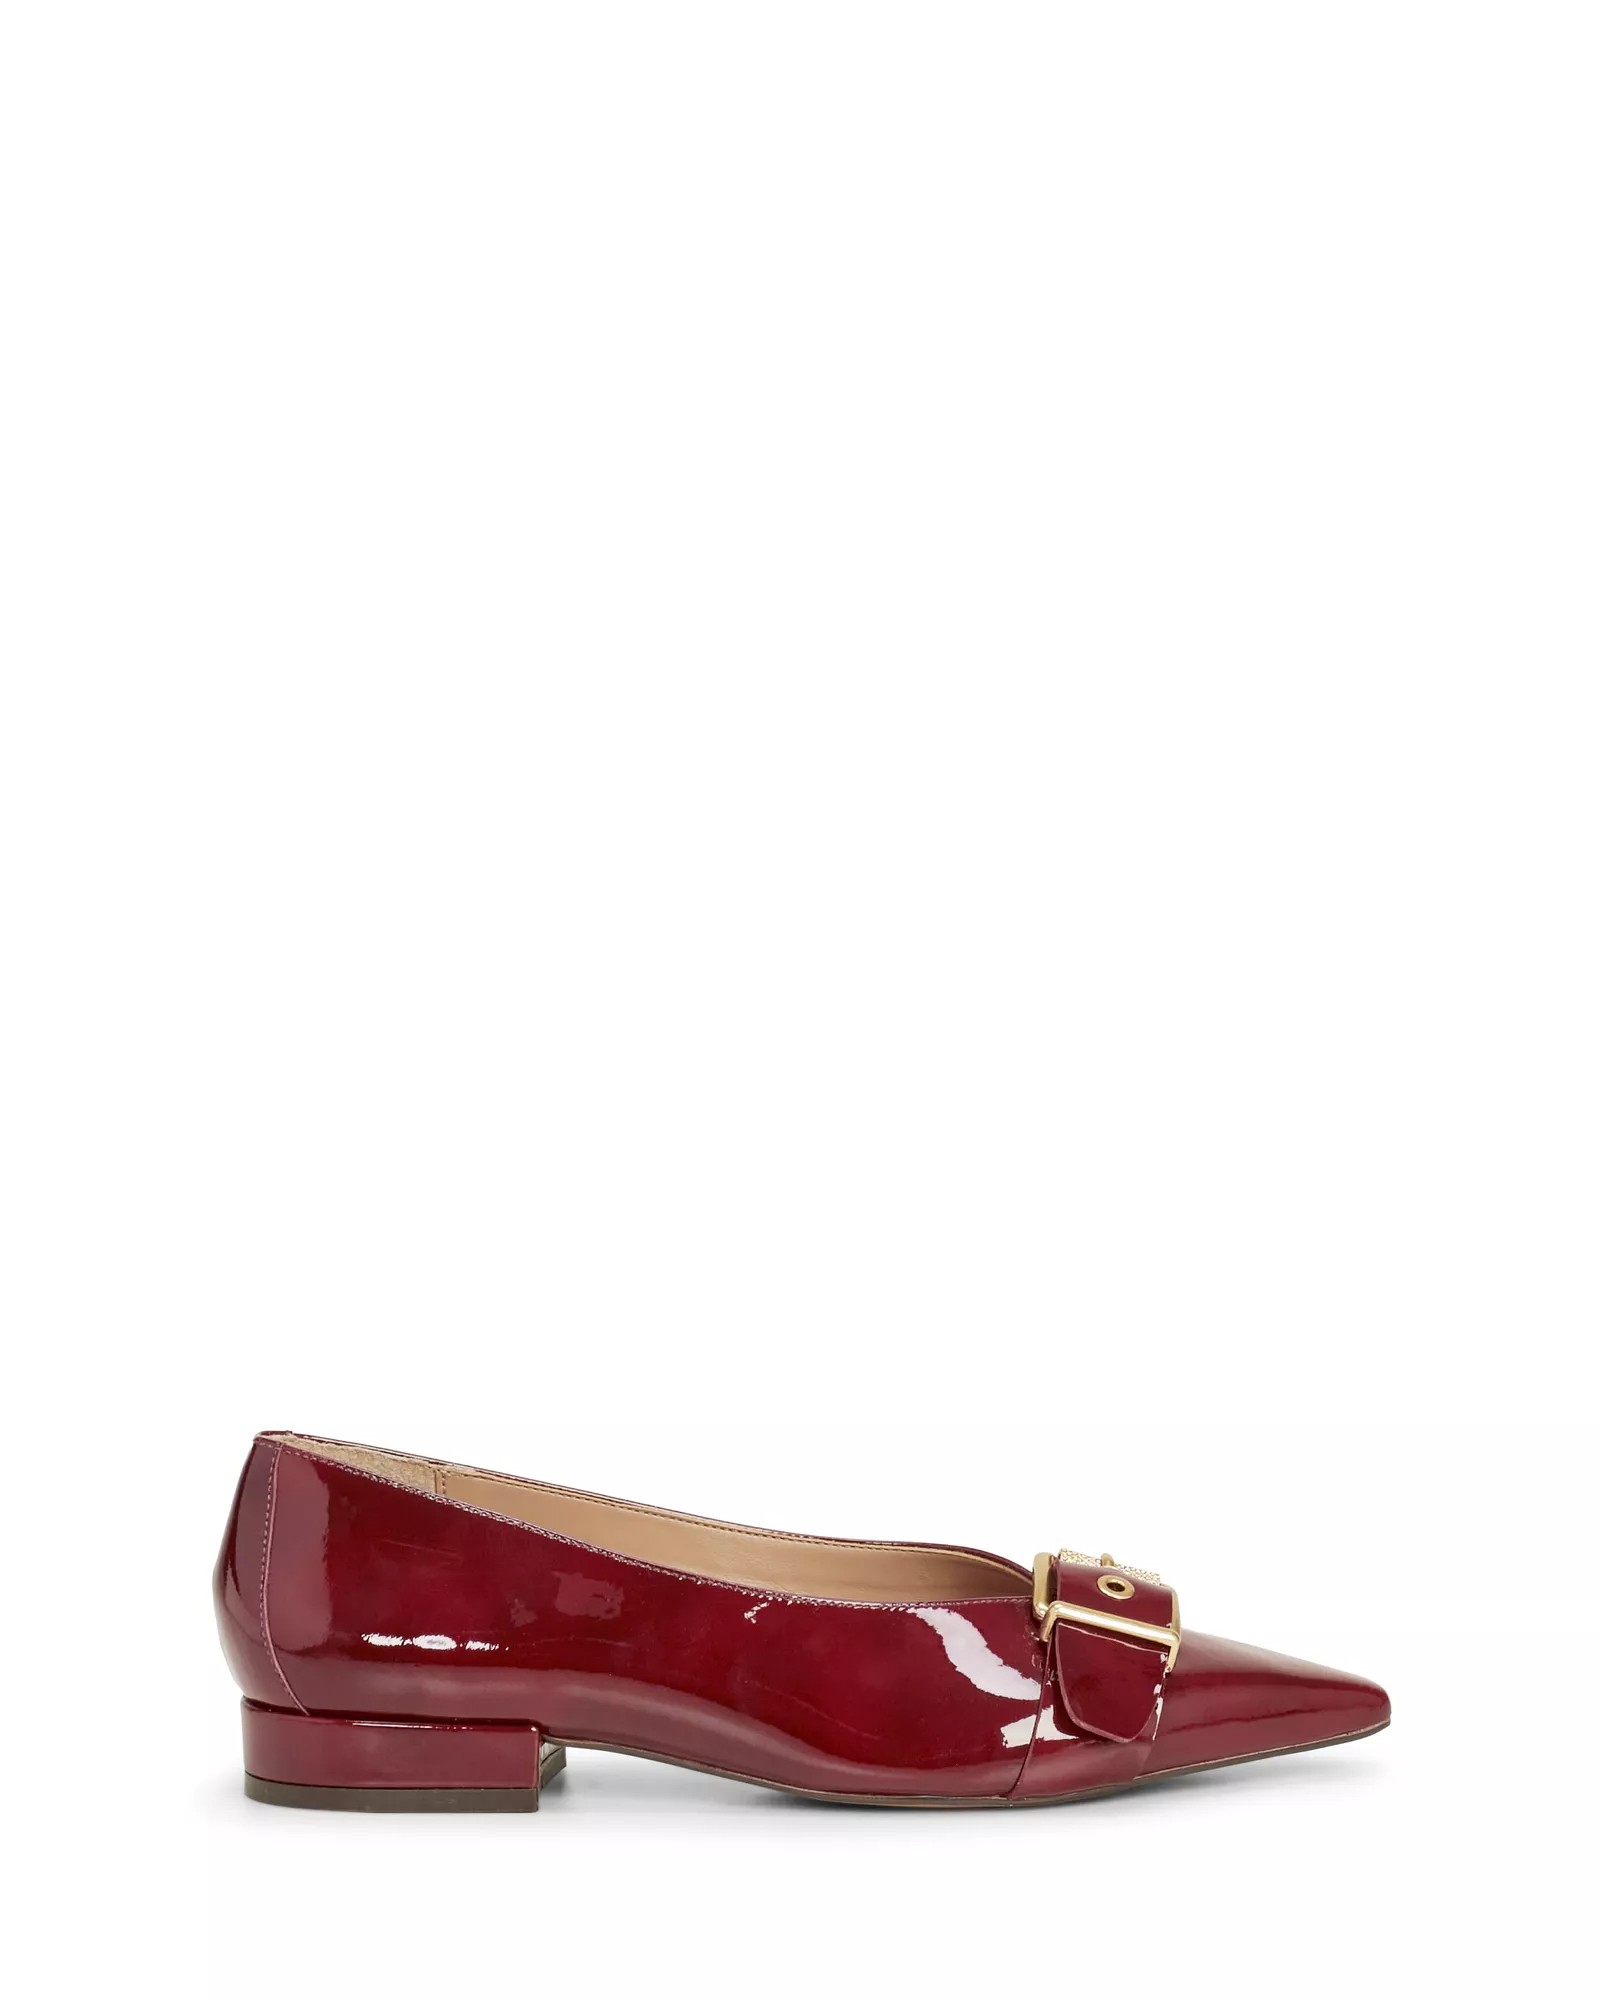 Women's Vince Camuto Megdele Flats Size 6 Red Currant